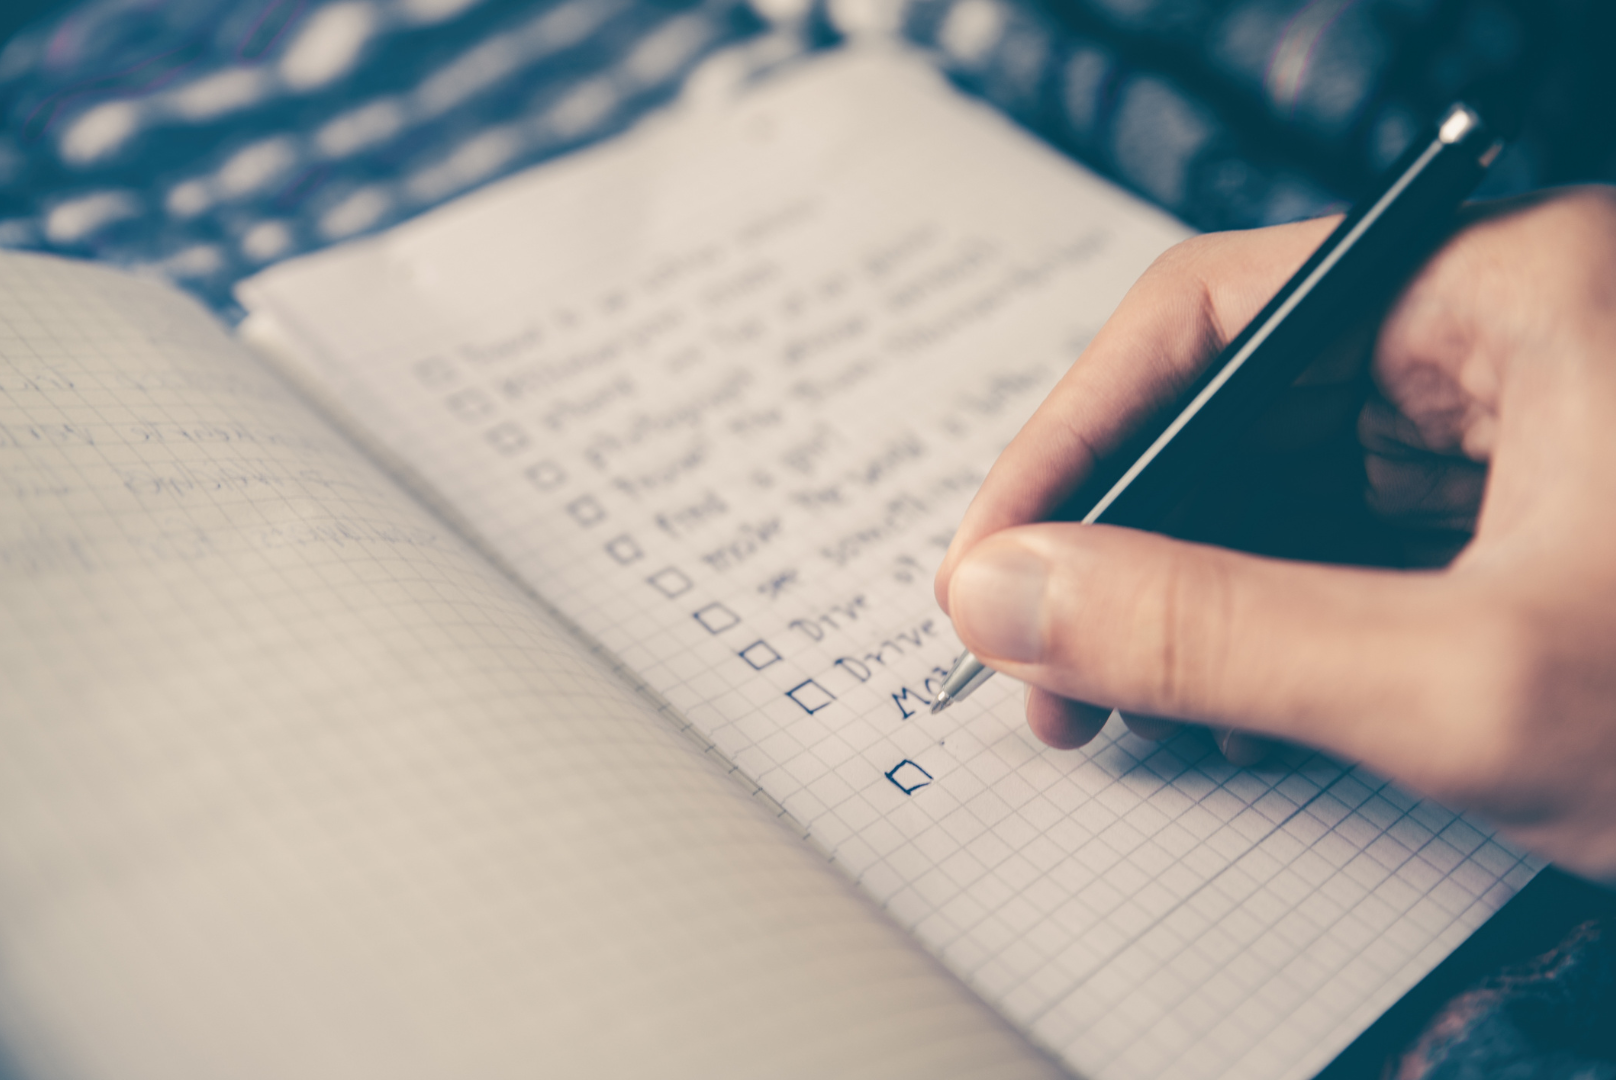 Writing checklist on notebook